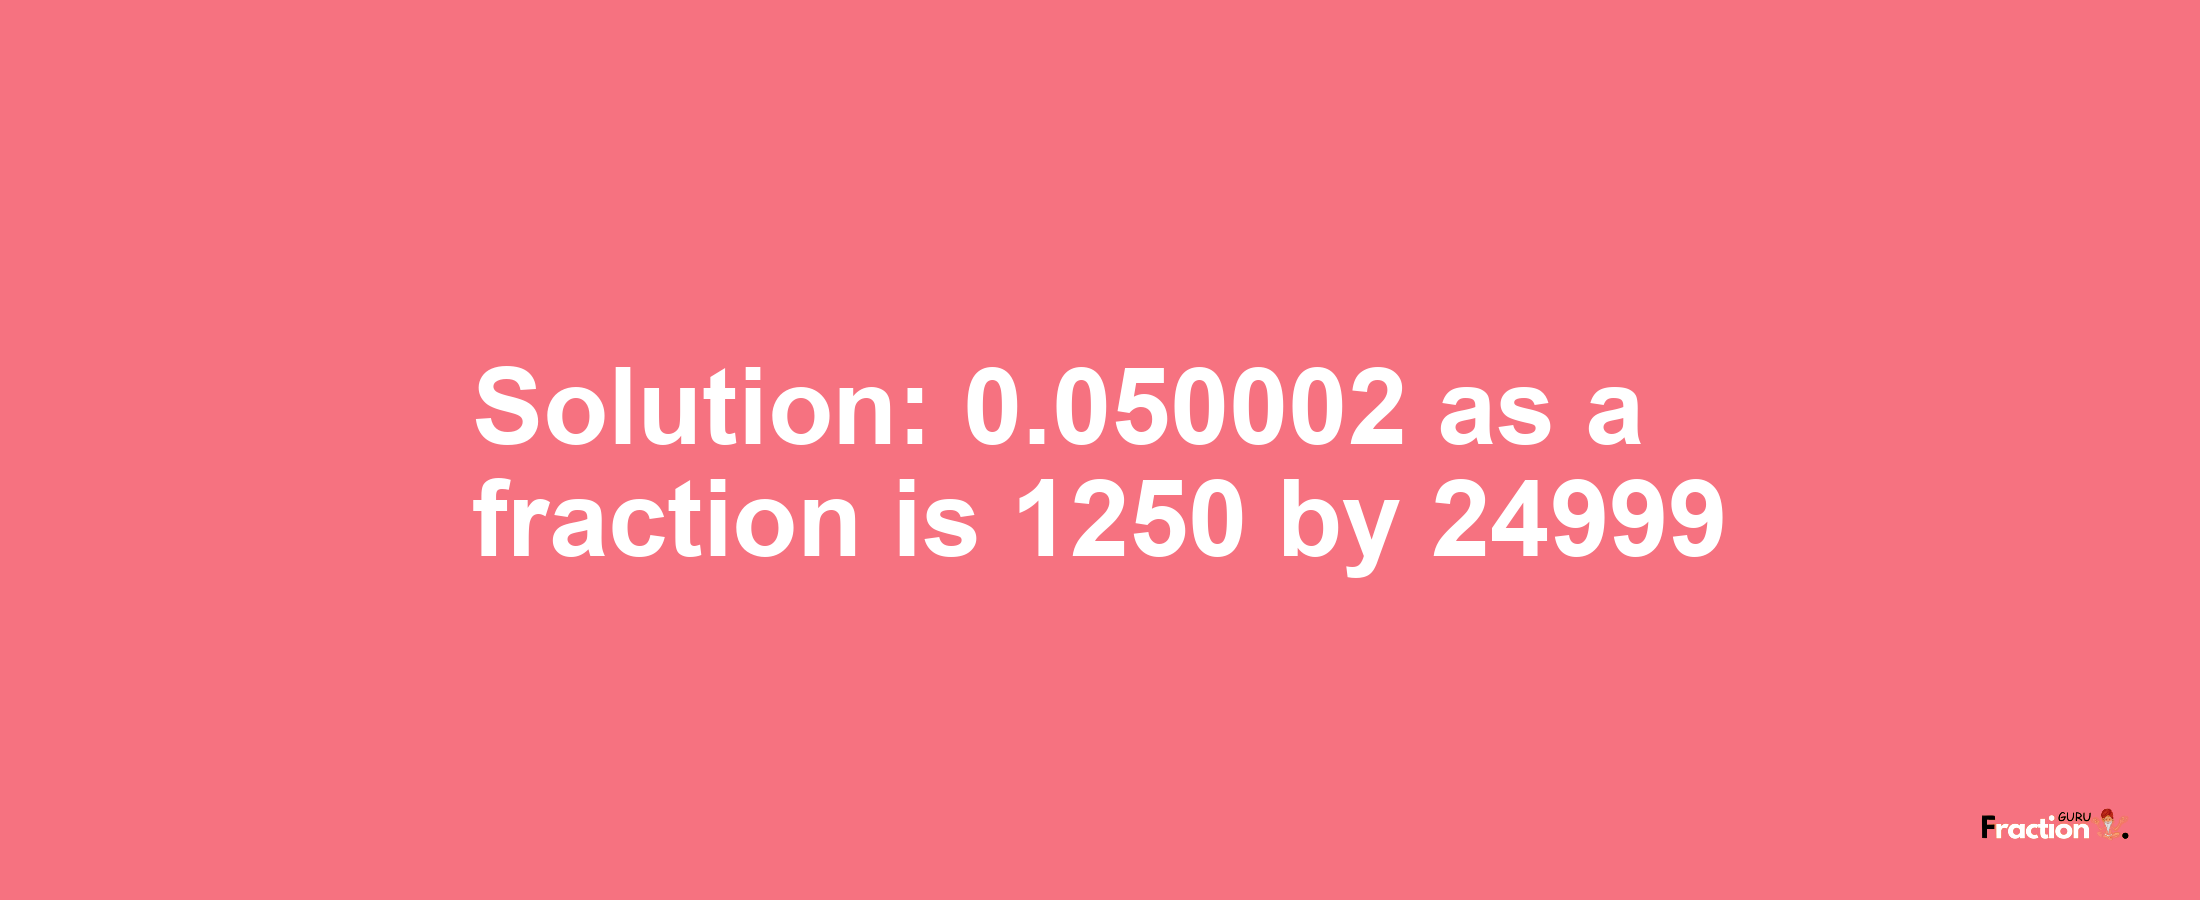 Solution:0.050002 as a fraction is 1250/24999